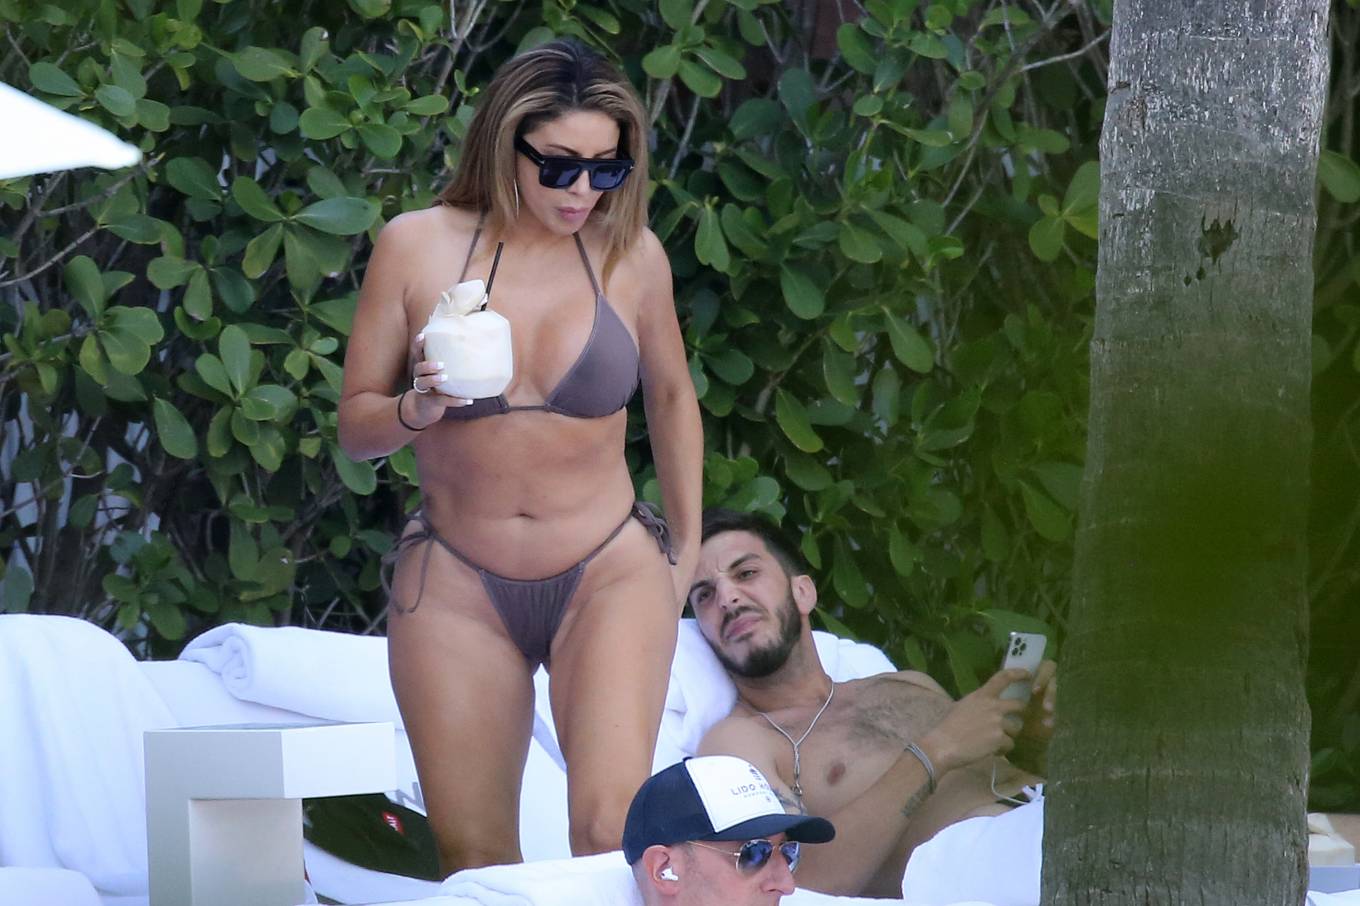 Larsa Pippen 2021 : Larsa Pippen - In a bikini with a mystery man by the po...